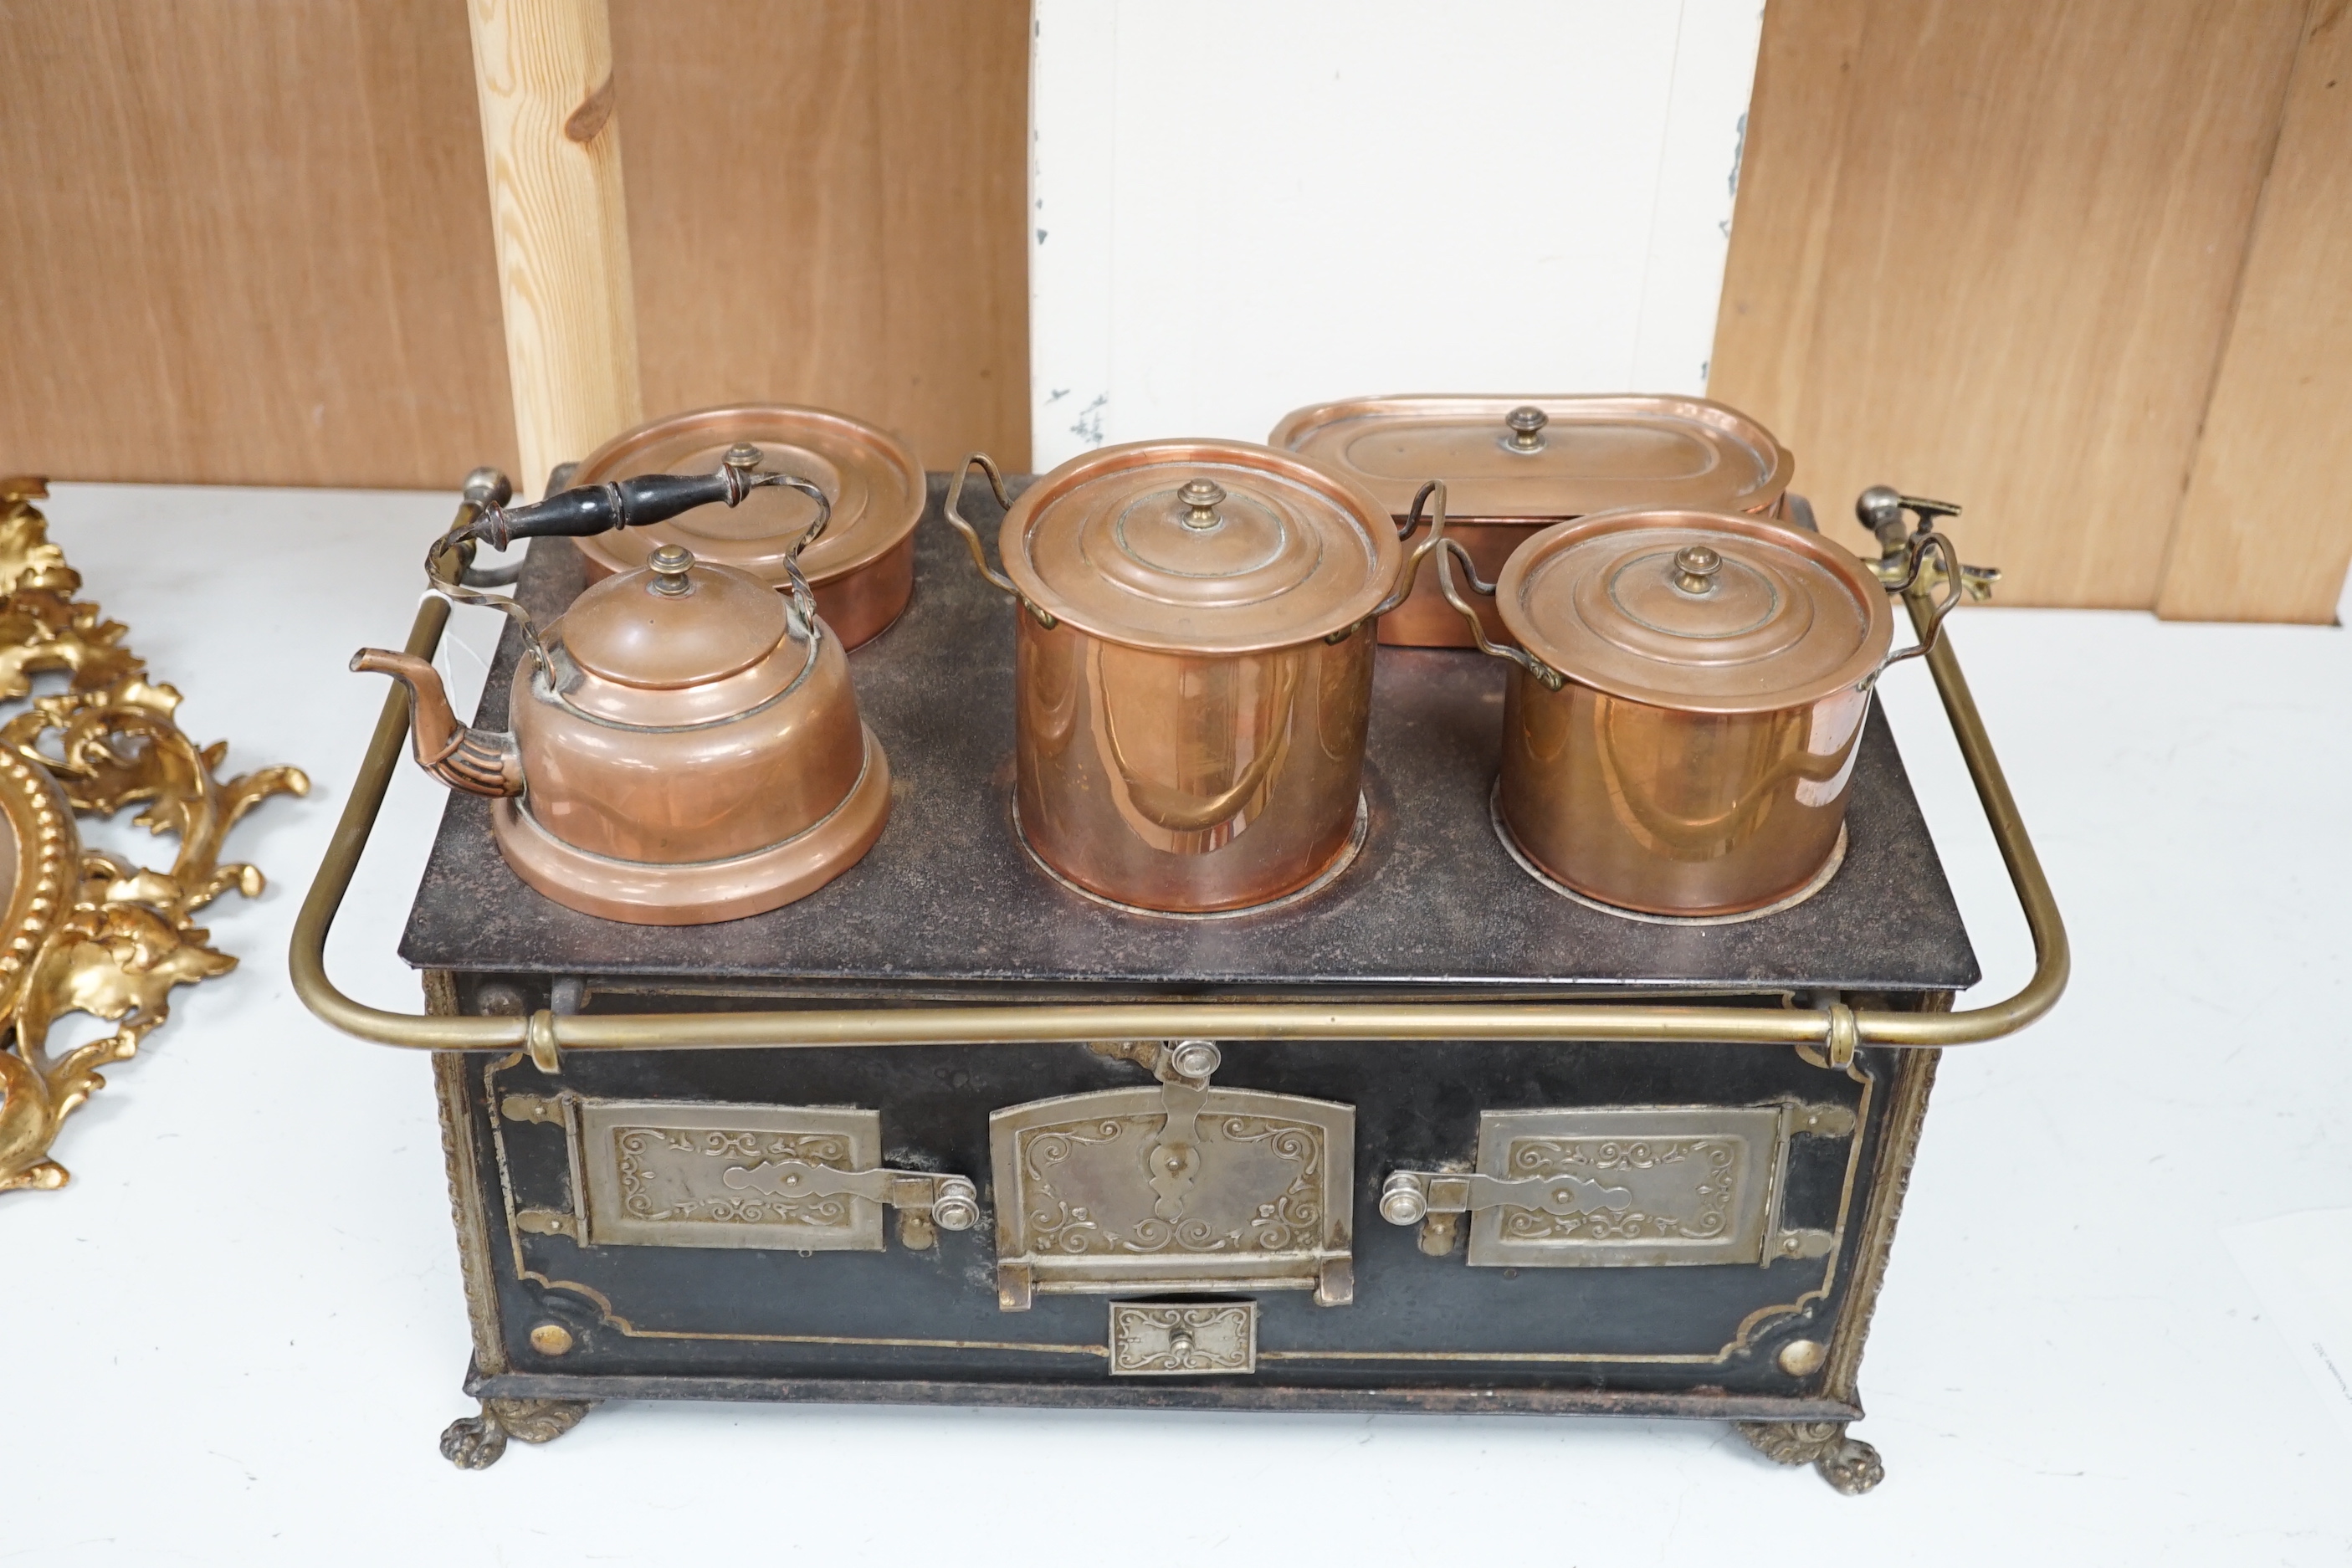 A Continental iron child's toy range/ stove, with a collection of copper fitted pans and a similar kettle, range 46cm wide x 28cm deep x 18.5cm high